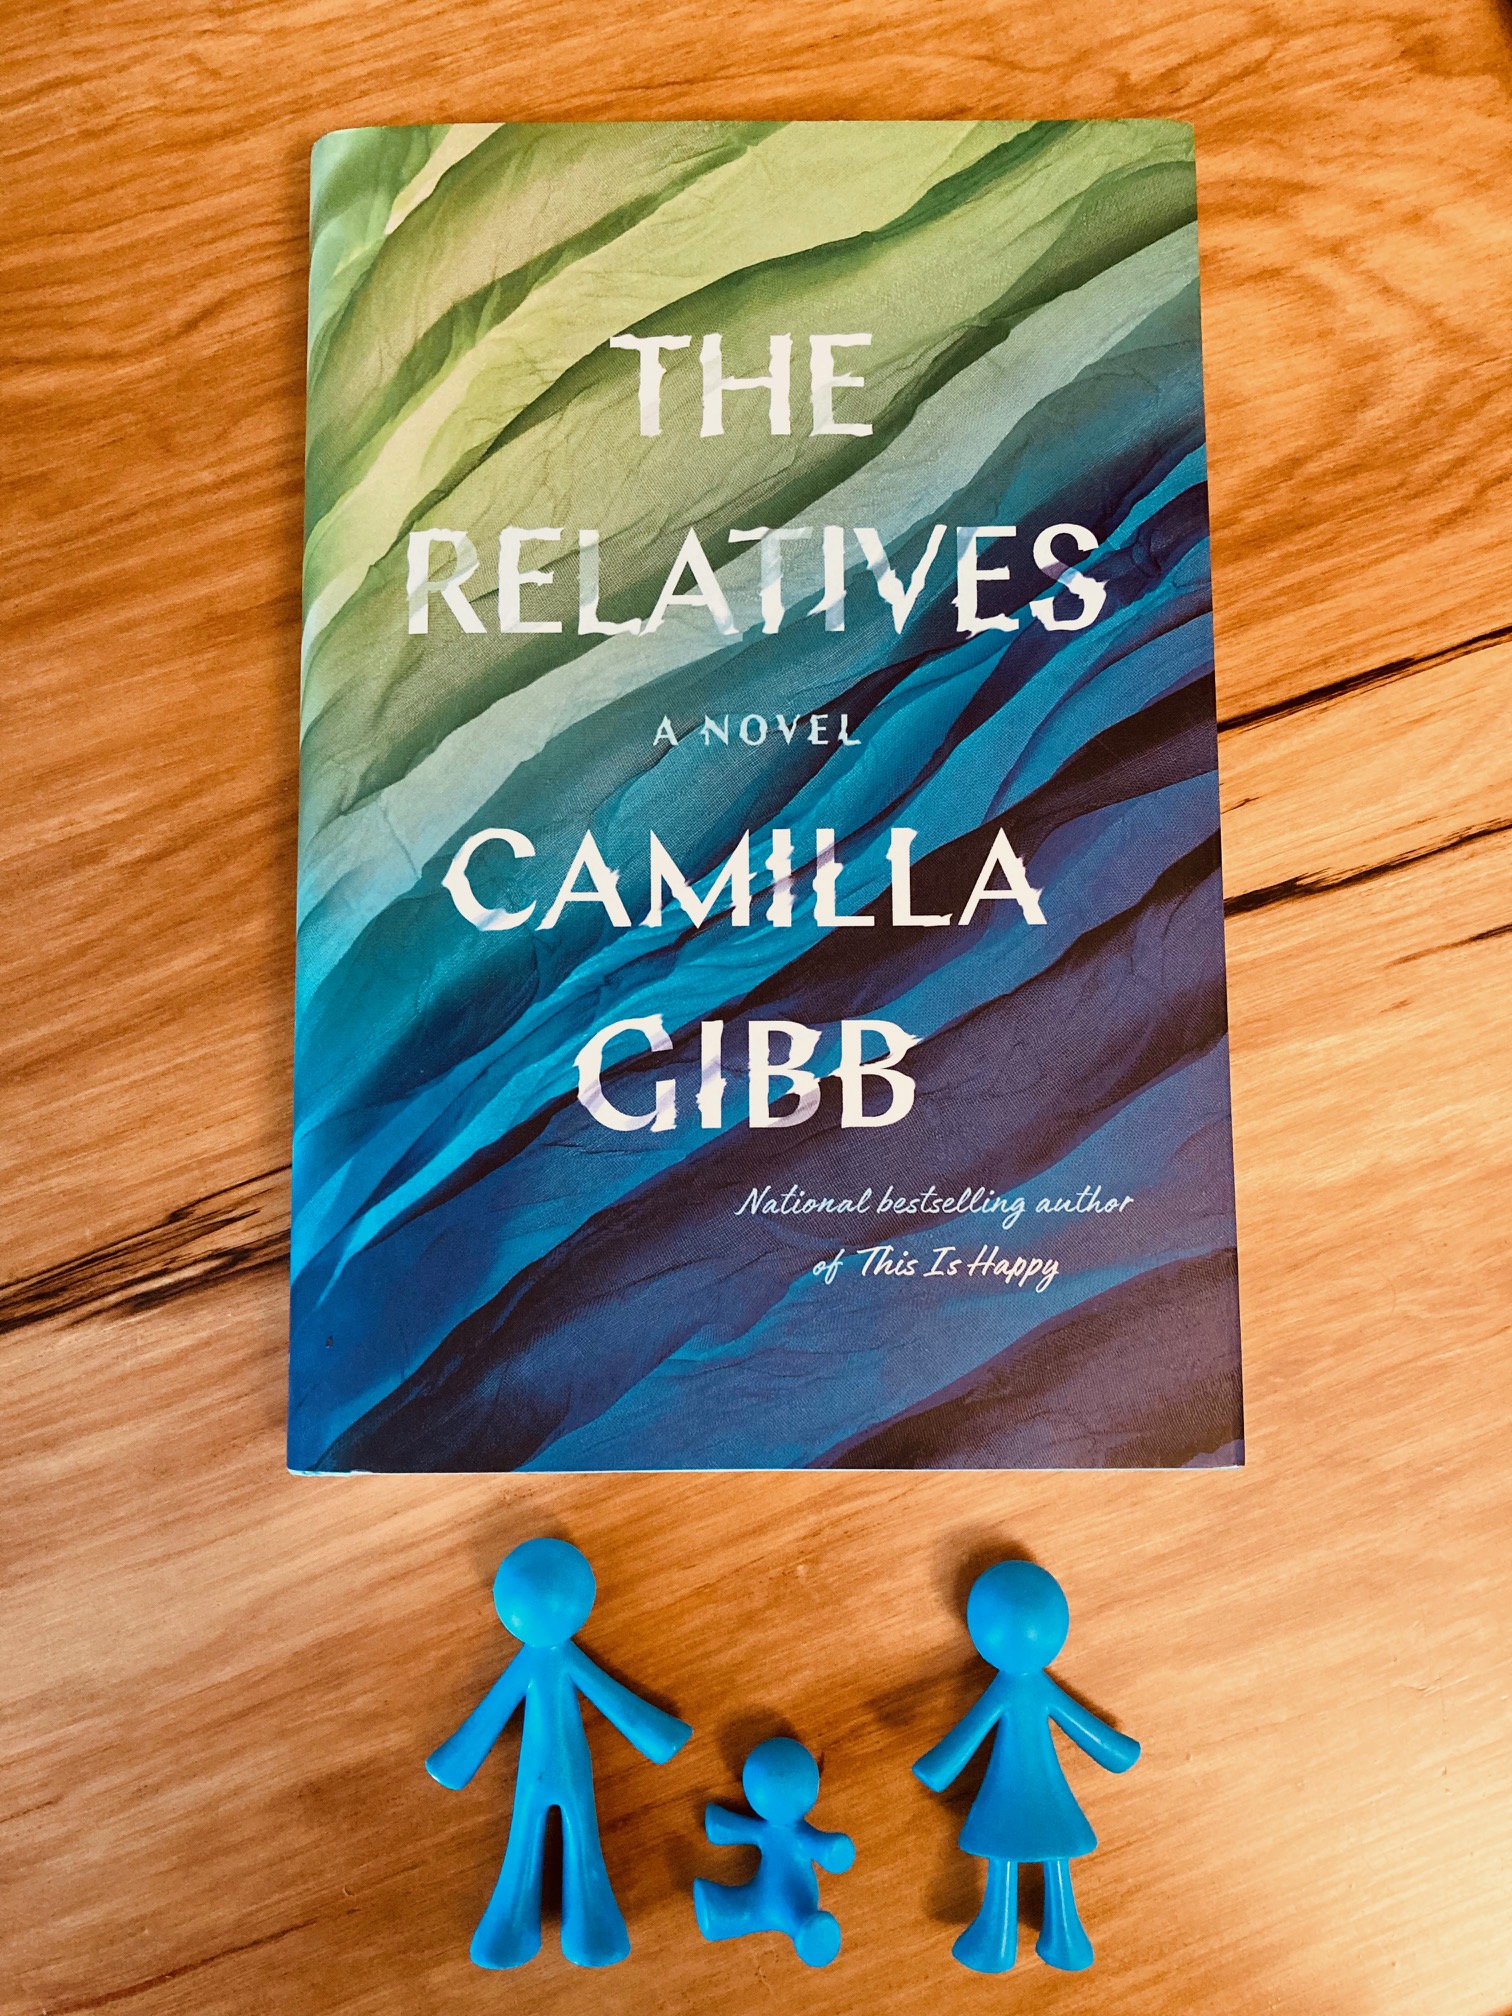 The Relatives by Camilla Gibb book pictured on a wooden background with three blue figures beneath it